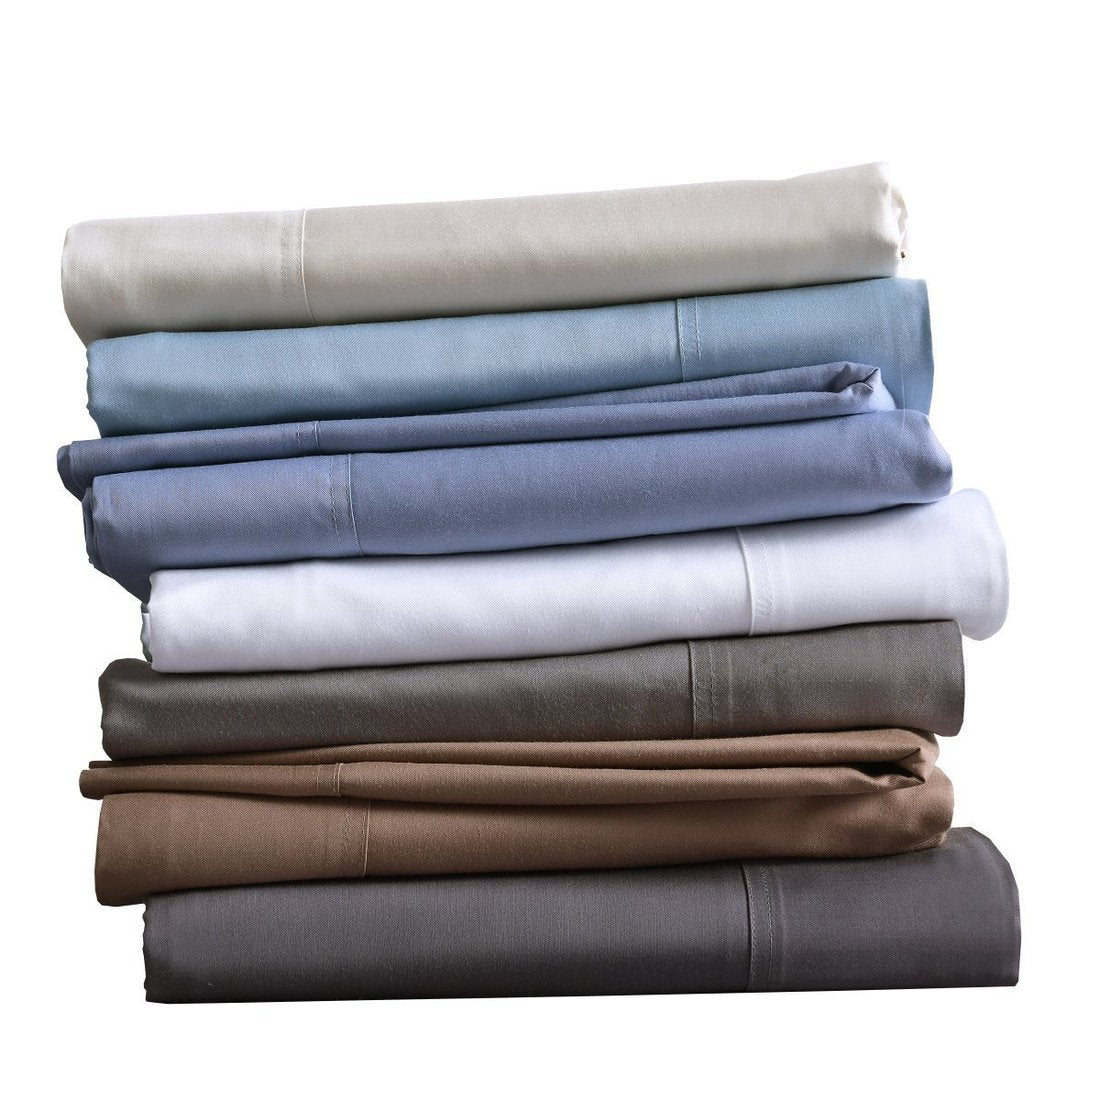 Silky Cotton, Bamboo-Cotton Blended 2 Pillowcases (Hybrid)